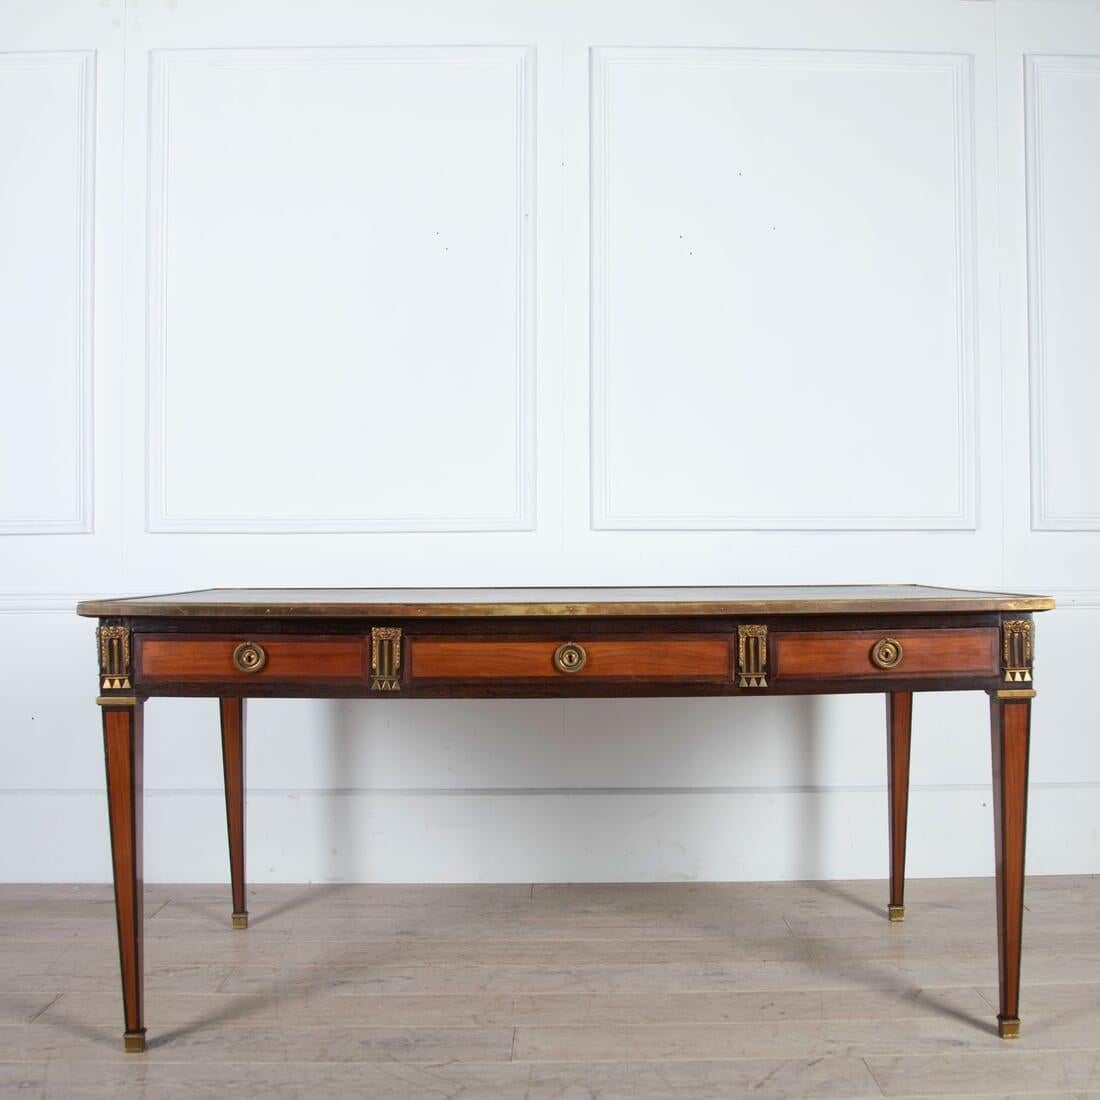 An early 20th century French bureau plat in Louis XVI style with brass-bound tooled leather top and well cast brass mounts.